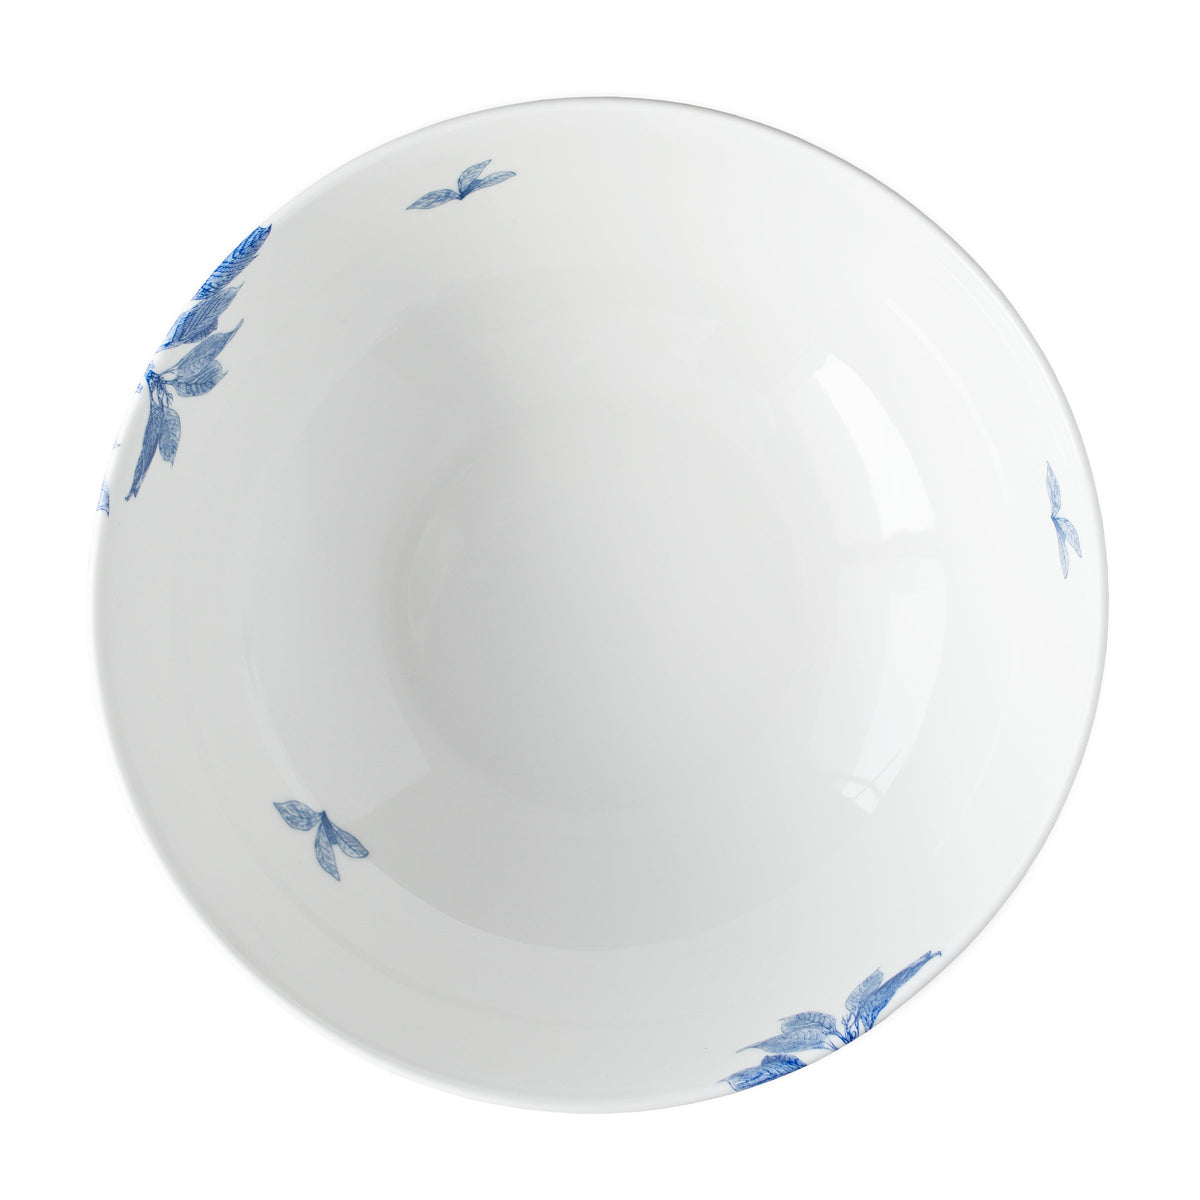 A Blue Arbor Vegetable Serving Bowl with blue flowers on it from Caskata Artisanal Home.